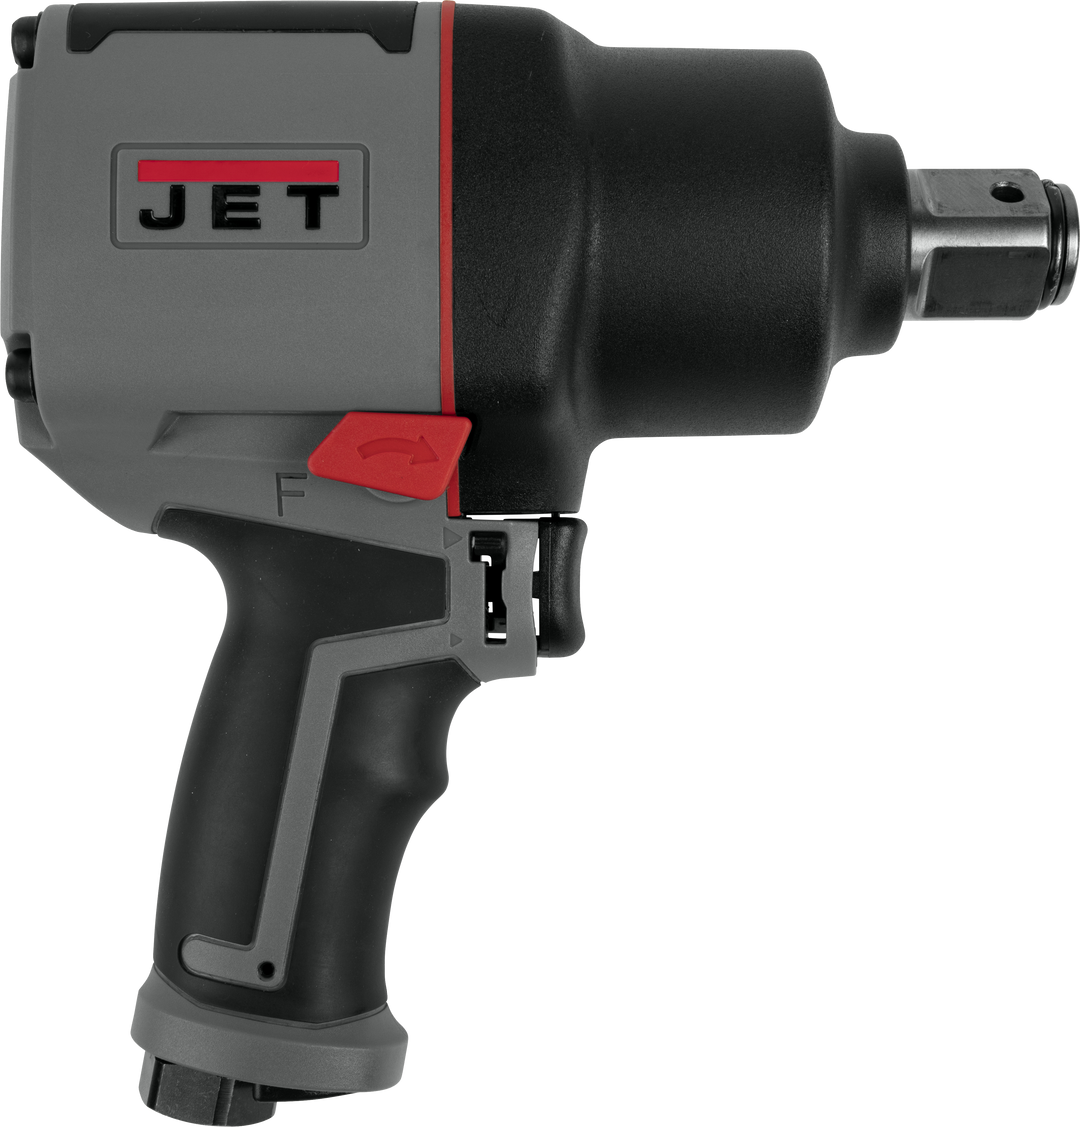 JET 1" Composite Impact Wrench